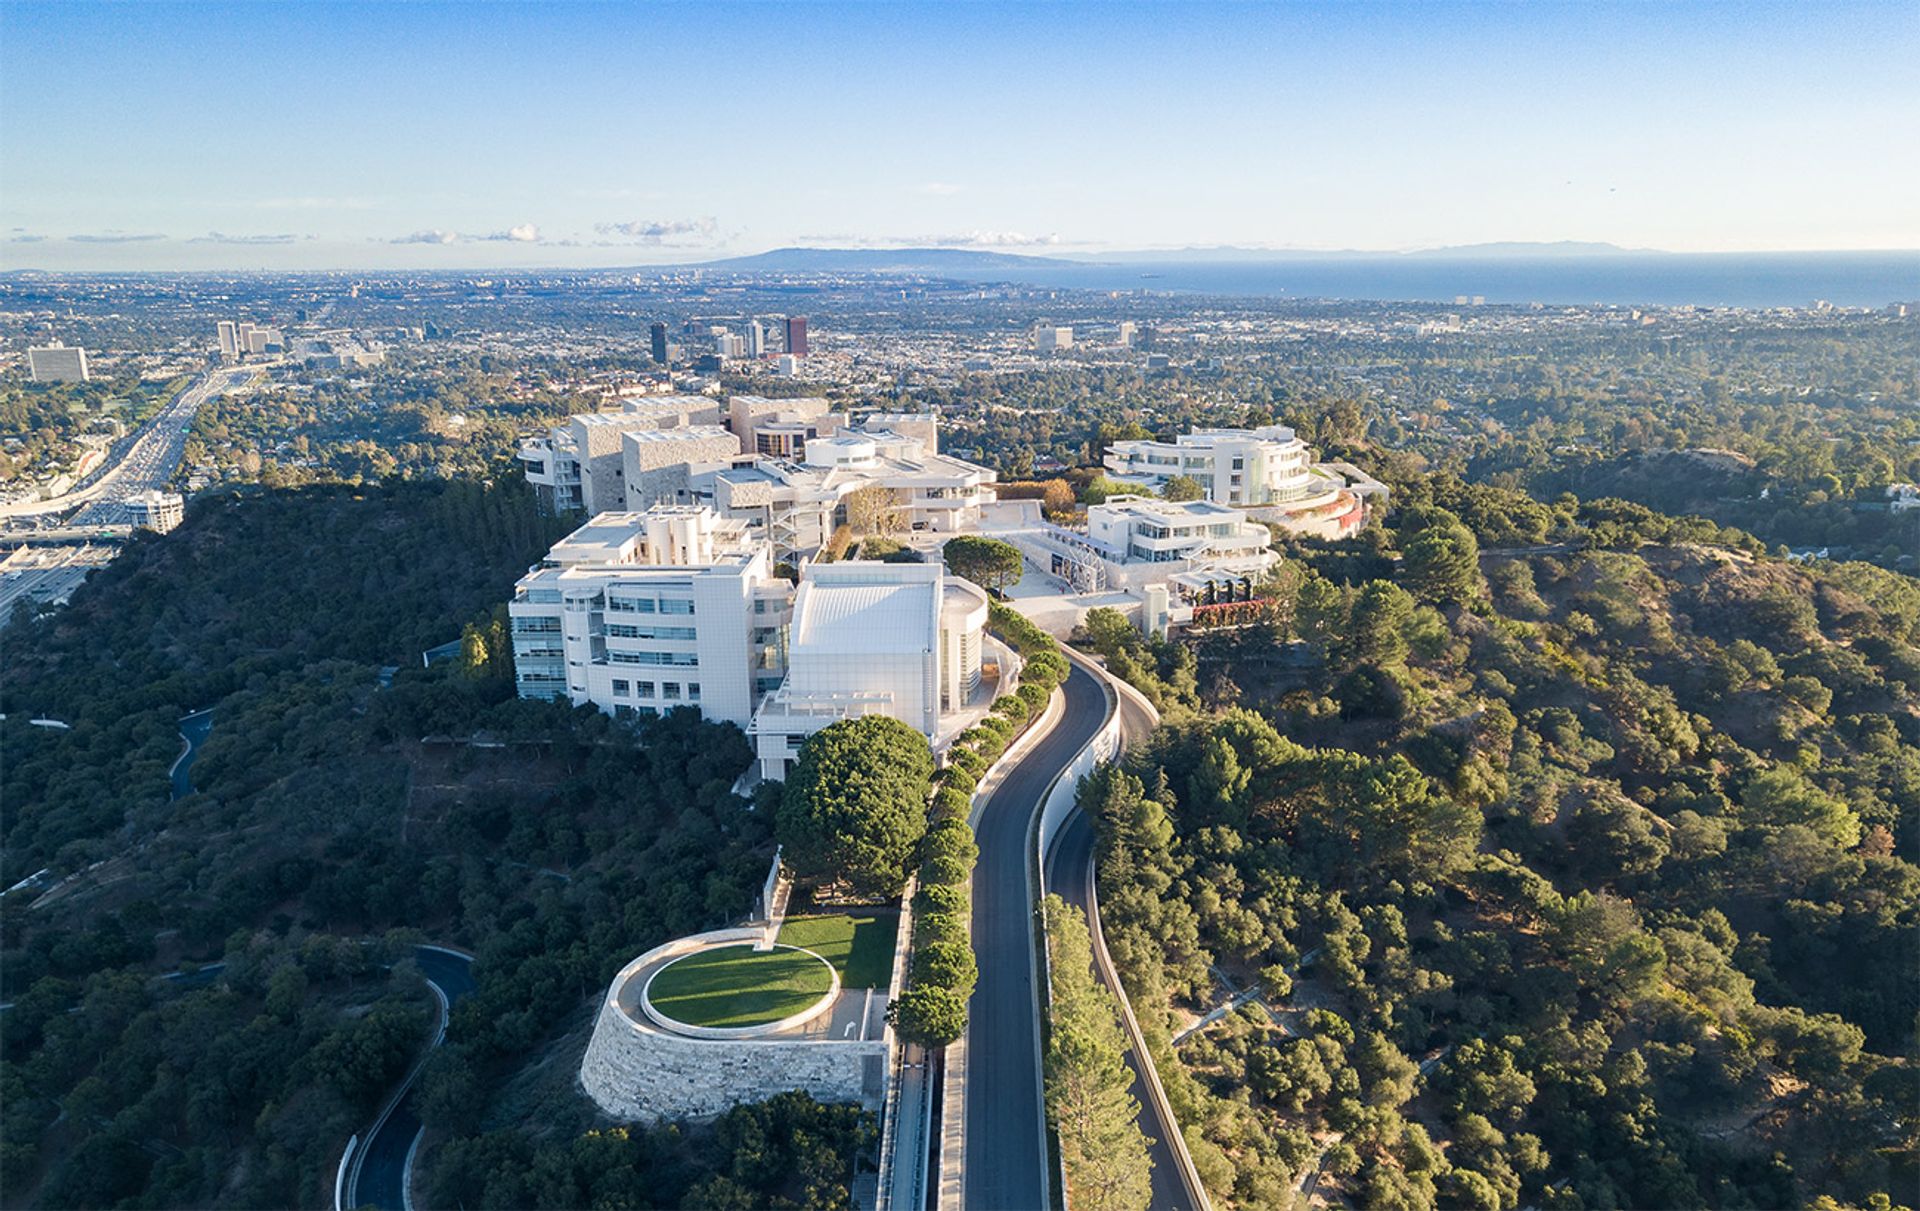 The Getty Center in Los Angeles 